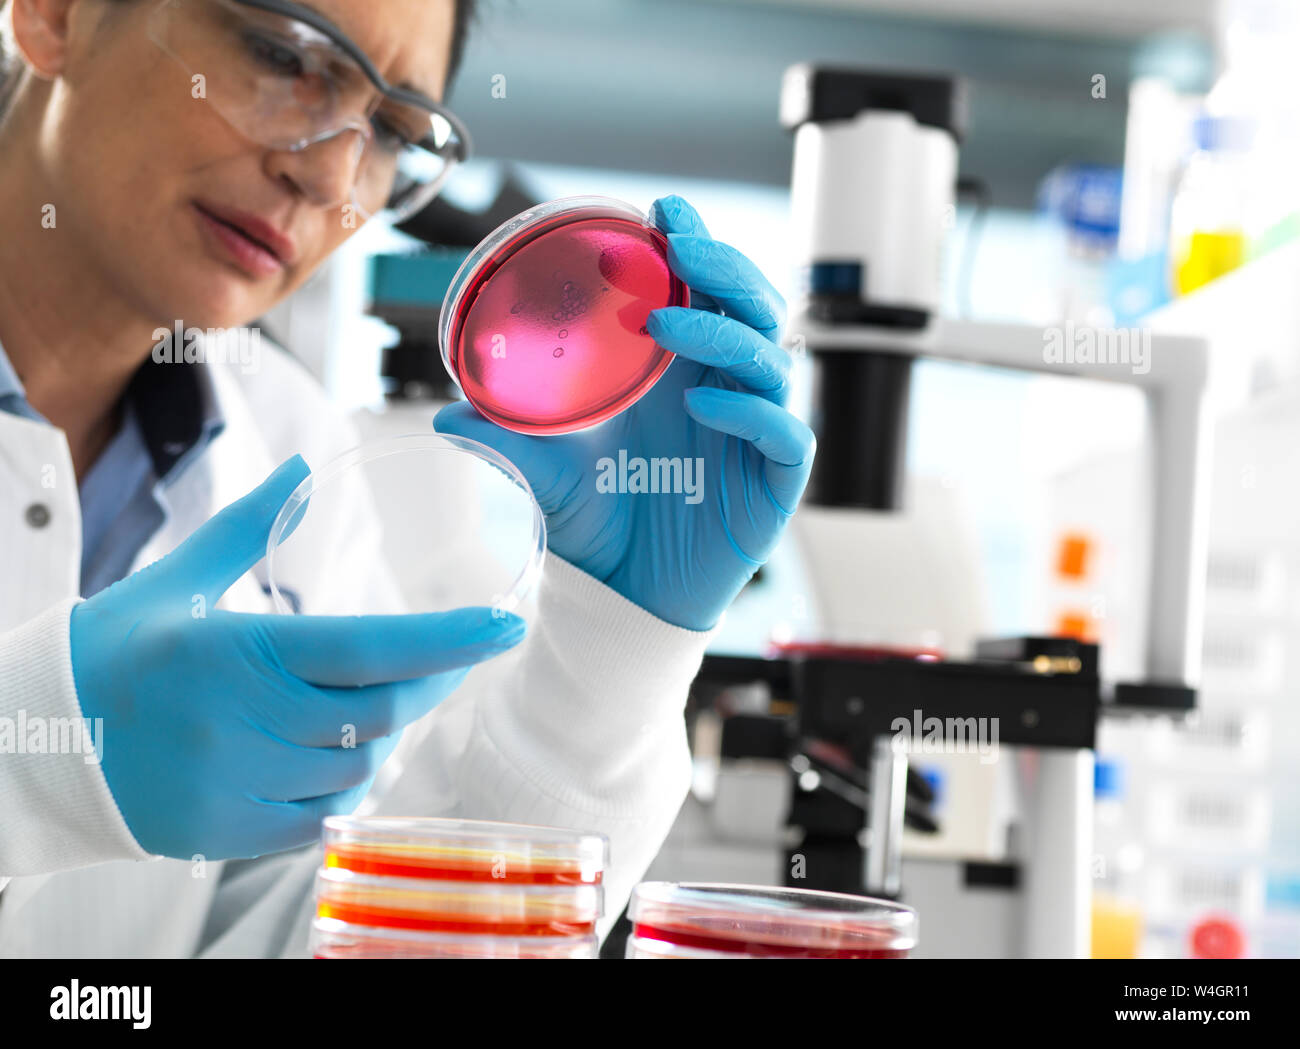 Scientist examining cultures growing in petri dishes using a inverted microscope in the laboratory Stock Photo